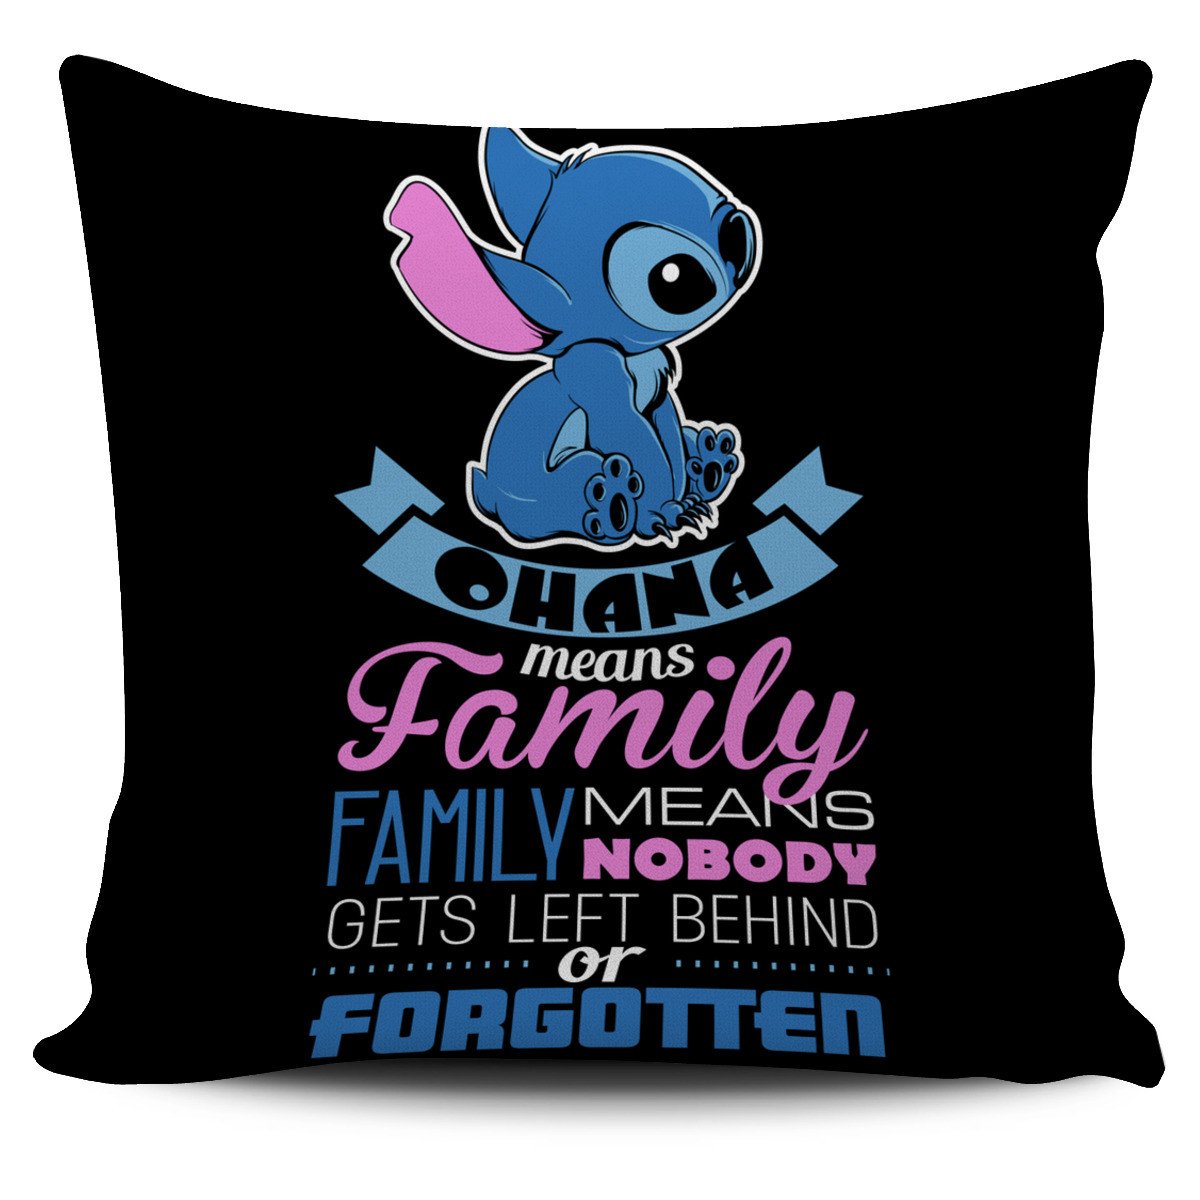 Stitch Pillow Cover